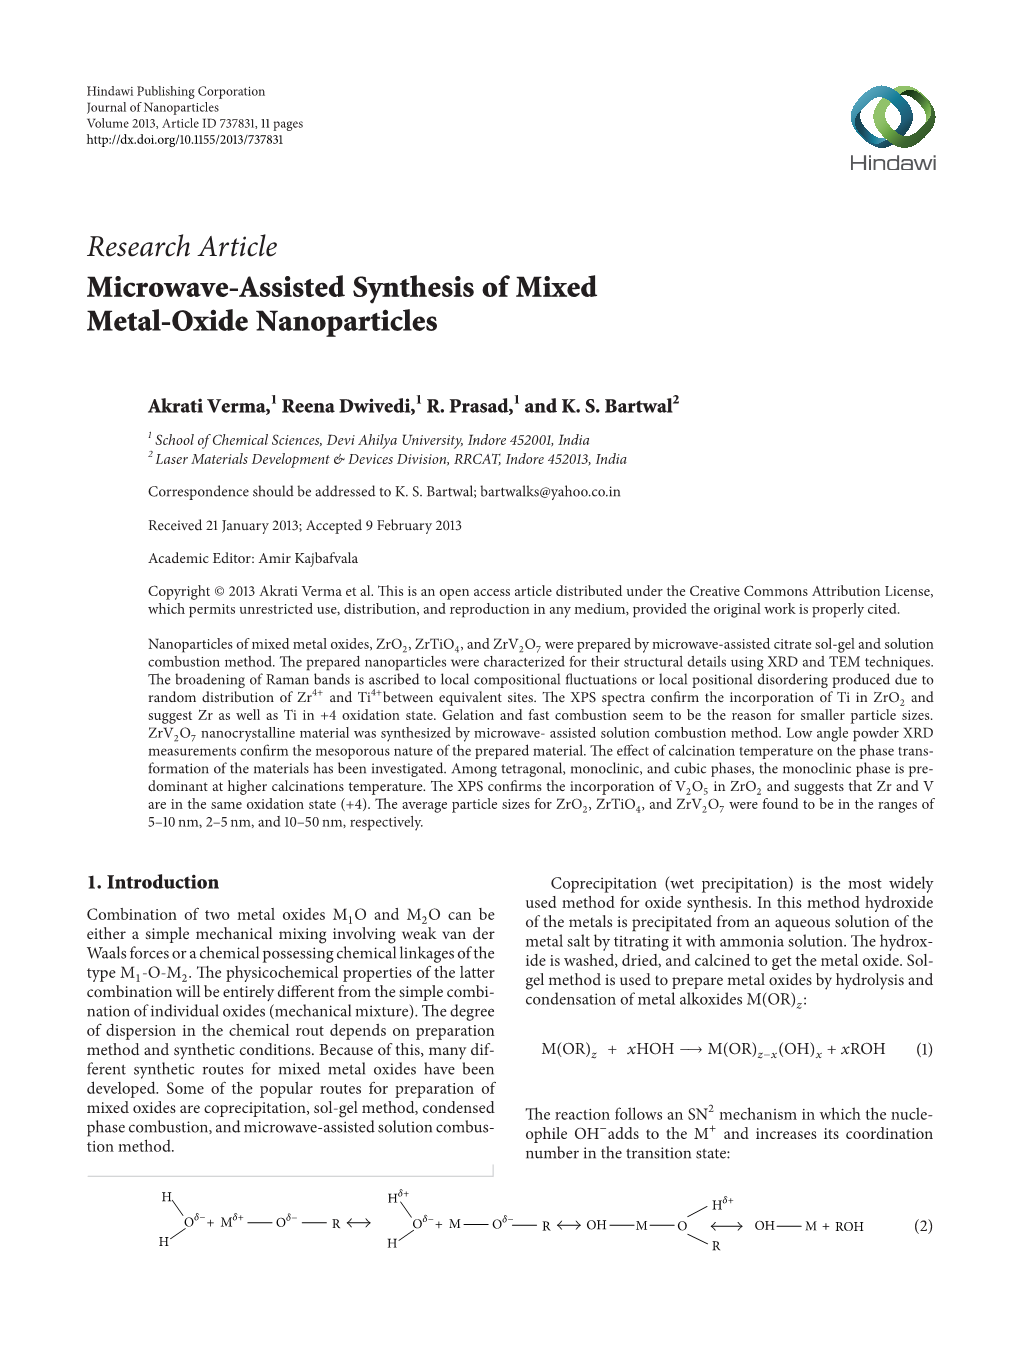 Research Article Microwave-Assisted Synthesis of Mixed Metal-Oxide Nanoparticles